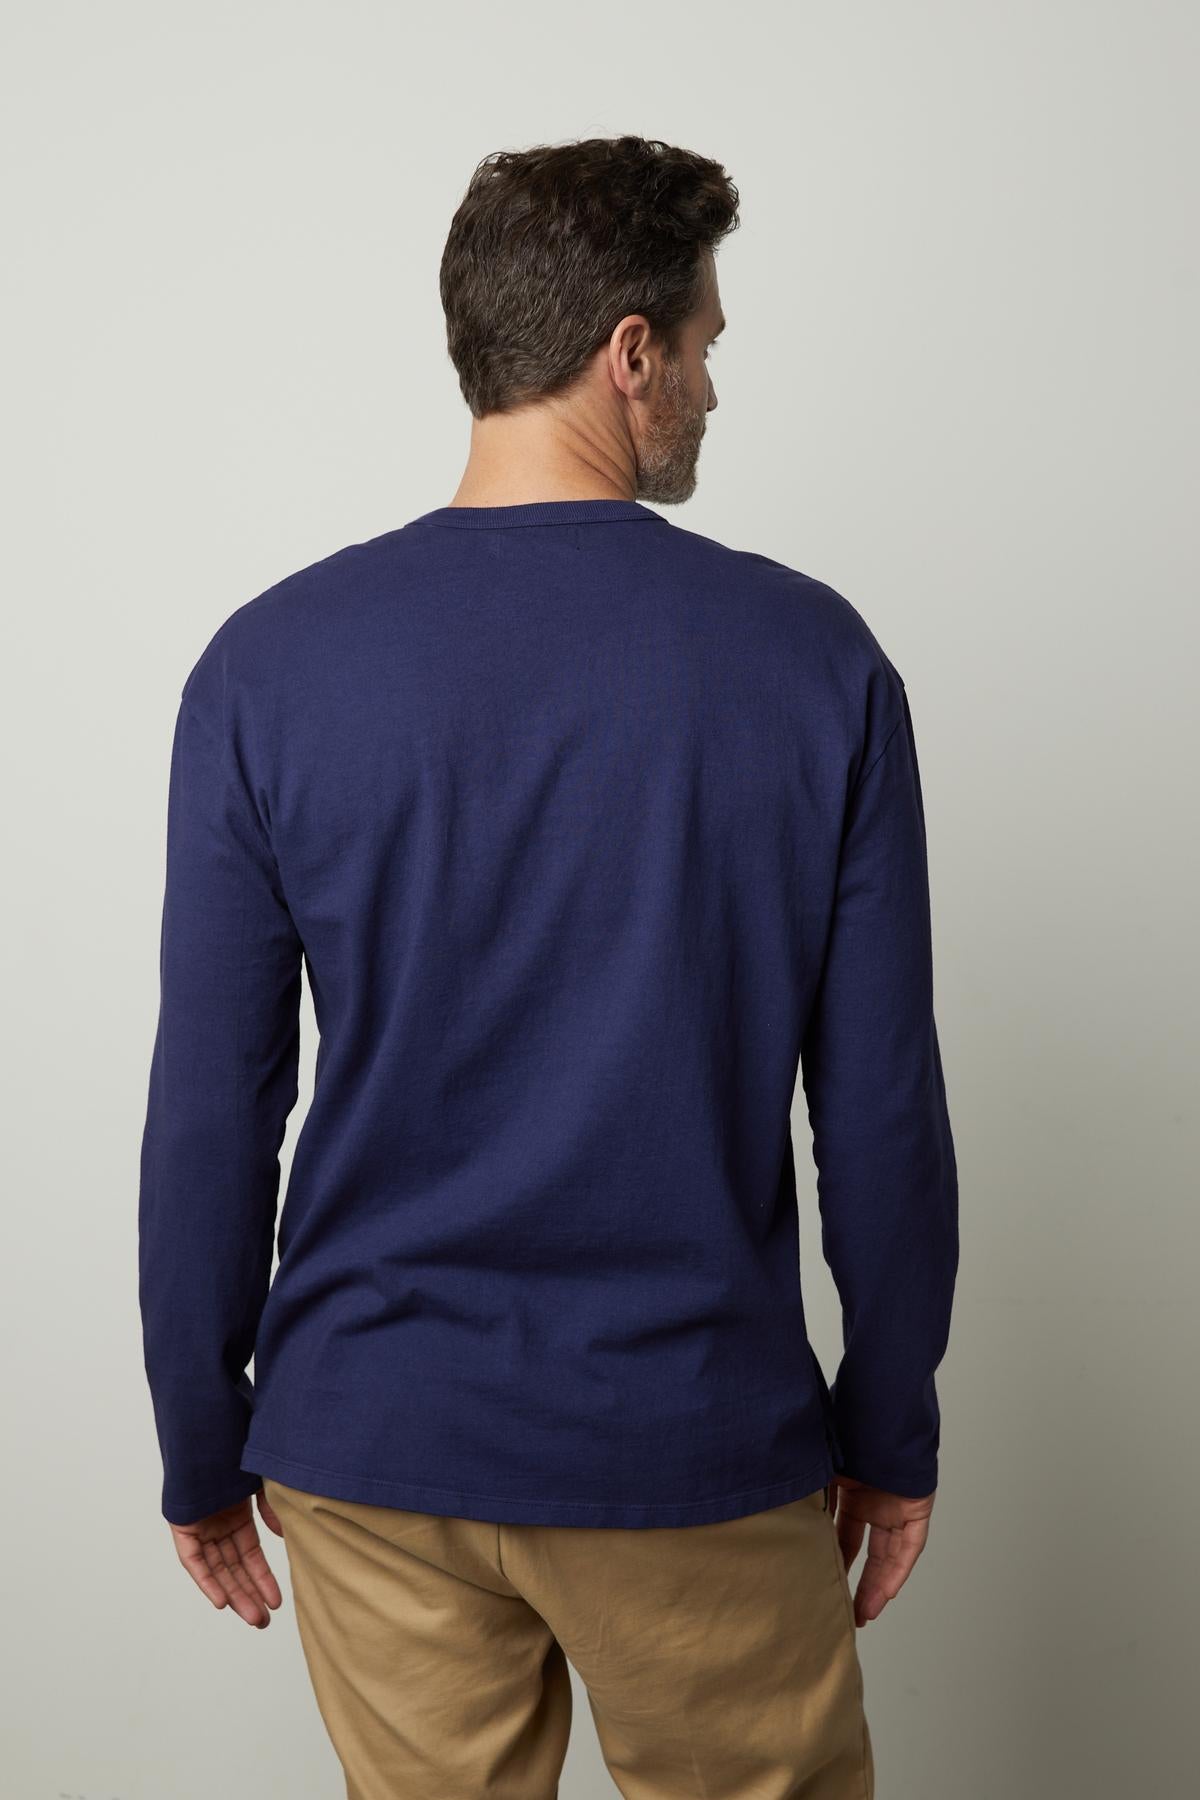 The back view of a man wearing a Velvet by Graham & Spencer EDWARD CREW NECK TEE.-35472062349505